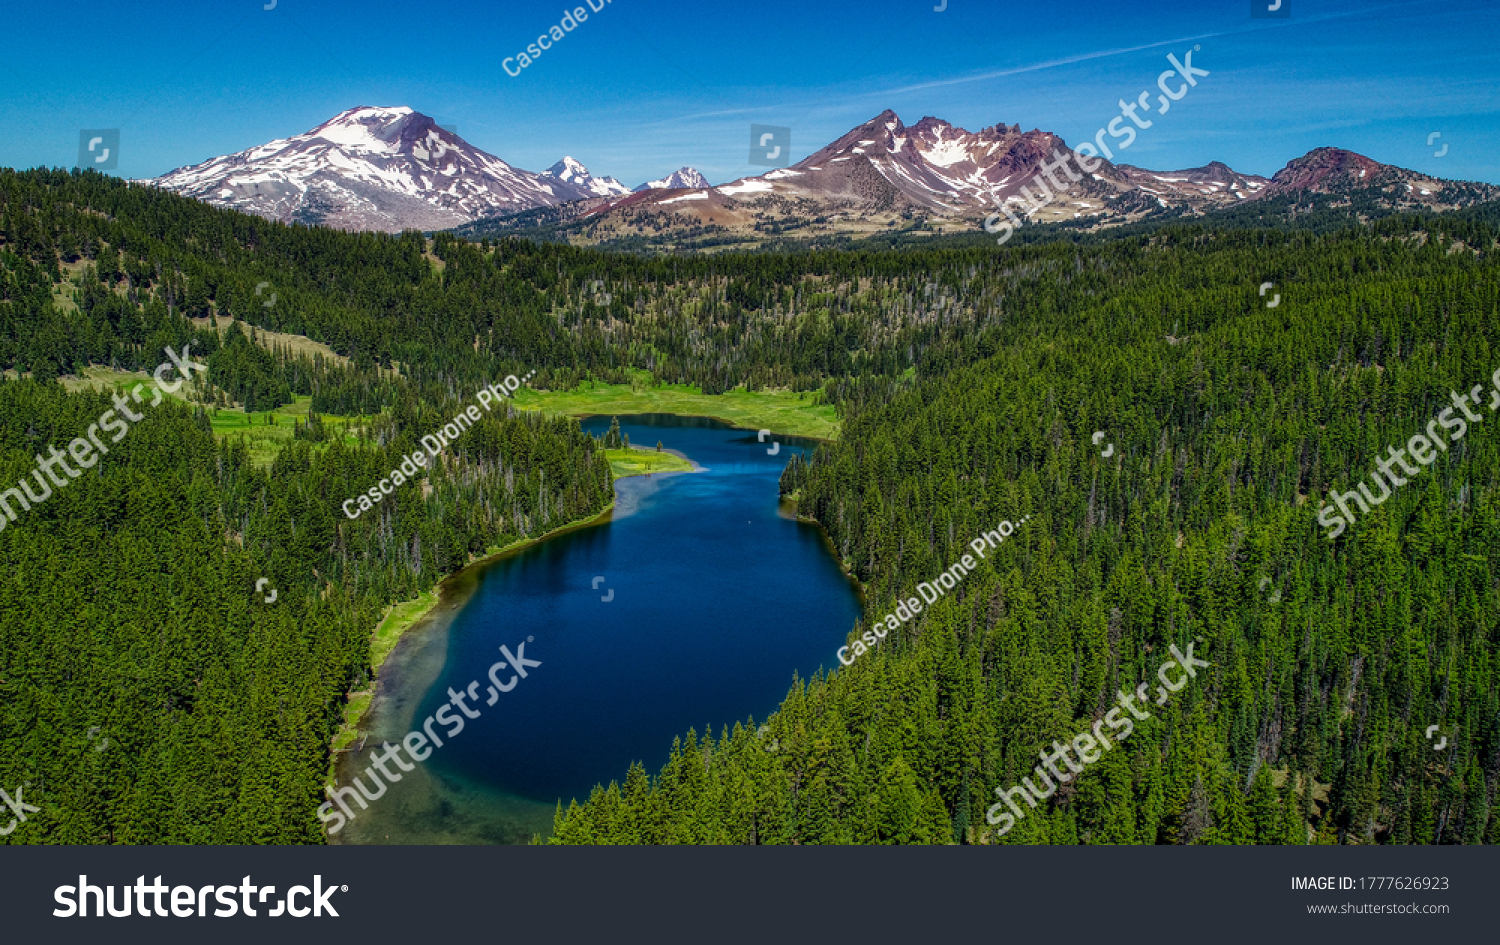 Aerial view of Todd Lake near Bend, Oregon. #1777626923